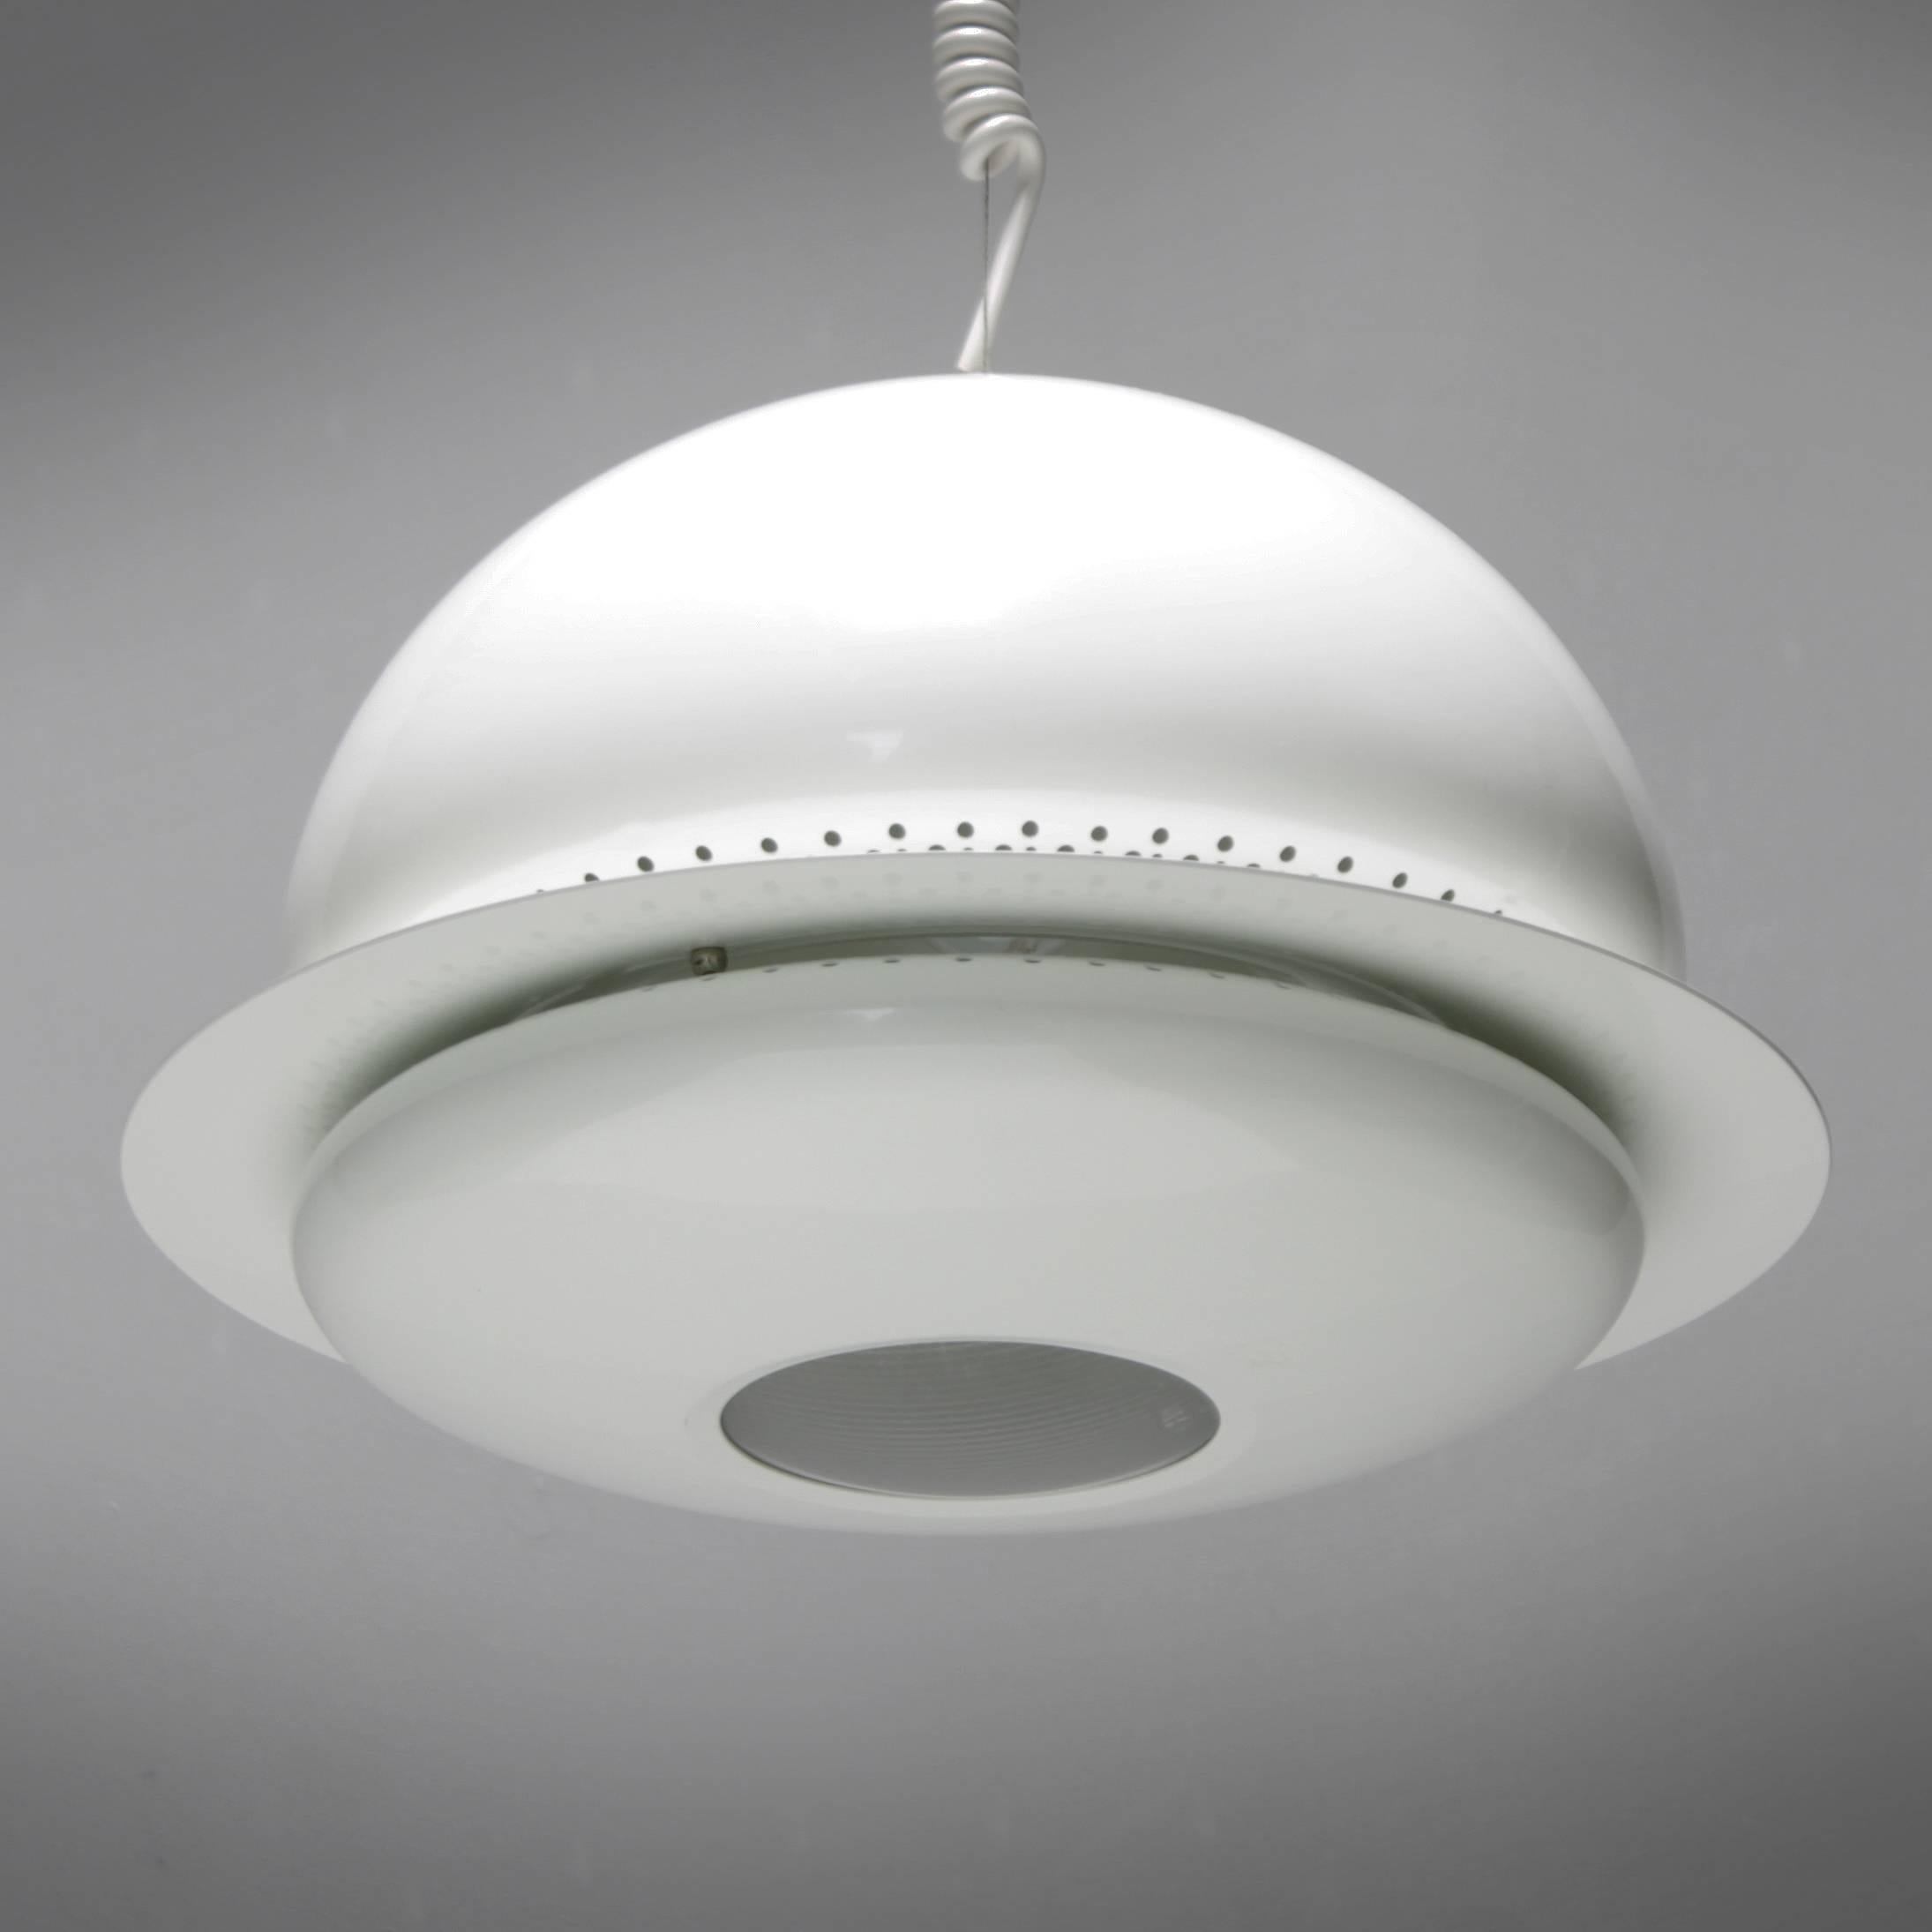 Unique pendant light by Afra & Tobia Scarpa. Like new, never used, comes in original box. 

The Nictea ceiling fixture was one of the first models ever produced by the famous Italian lighting company Flos. Production of this groundbreaking